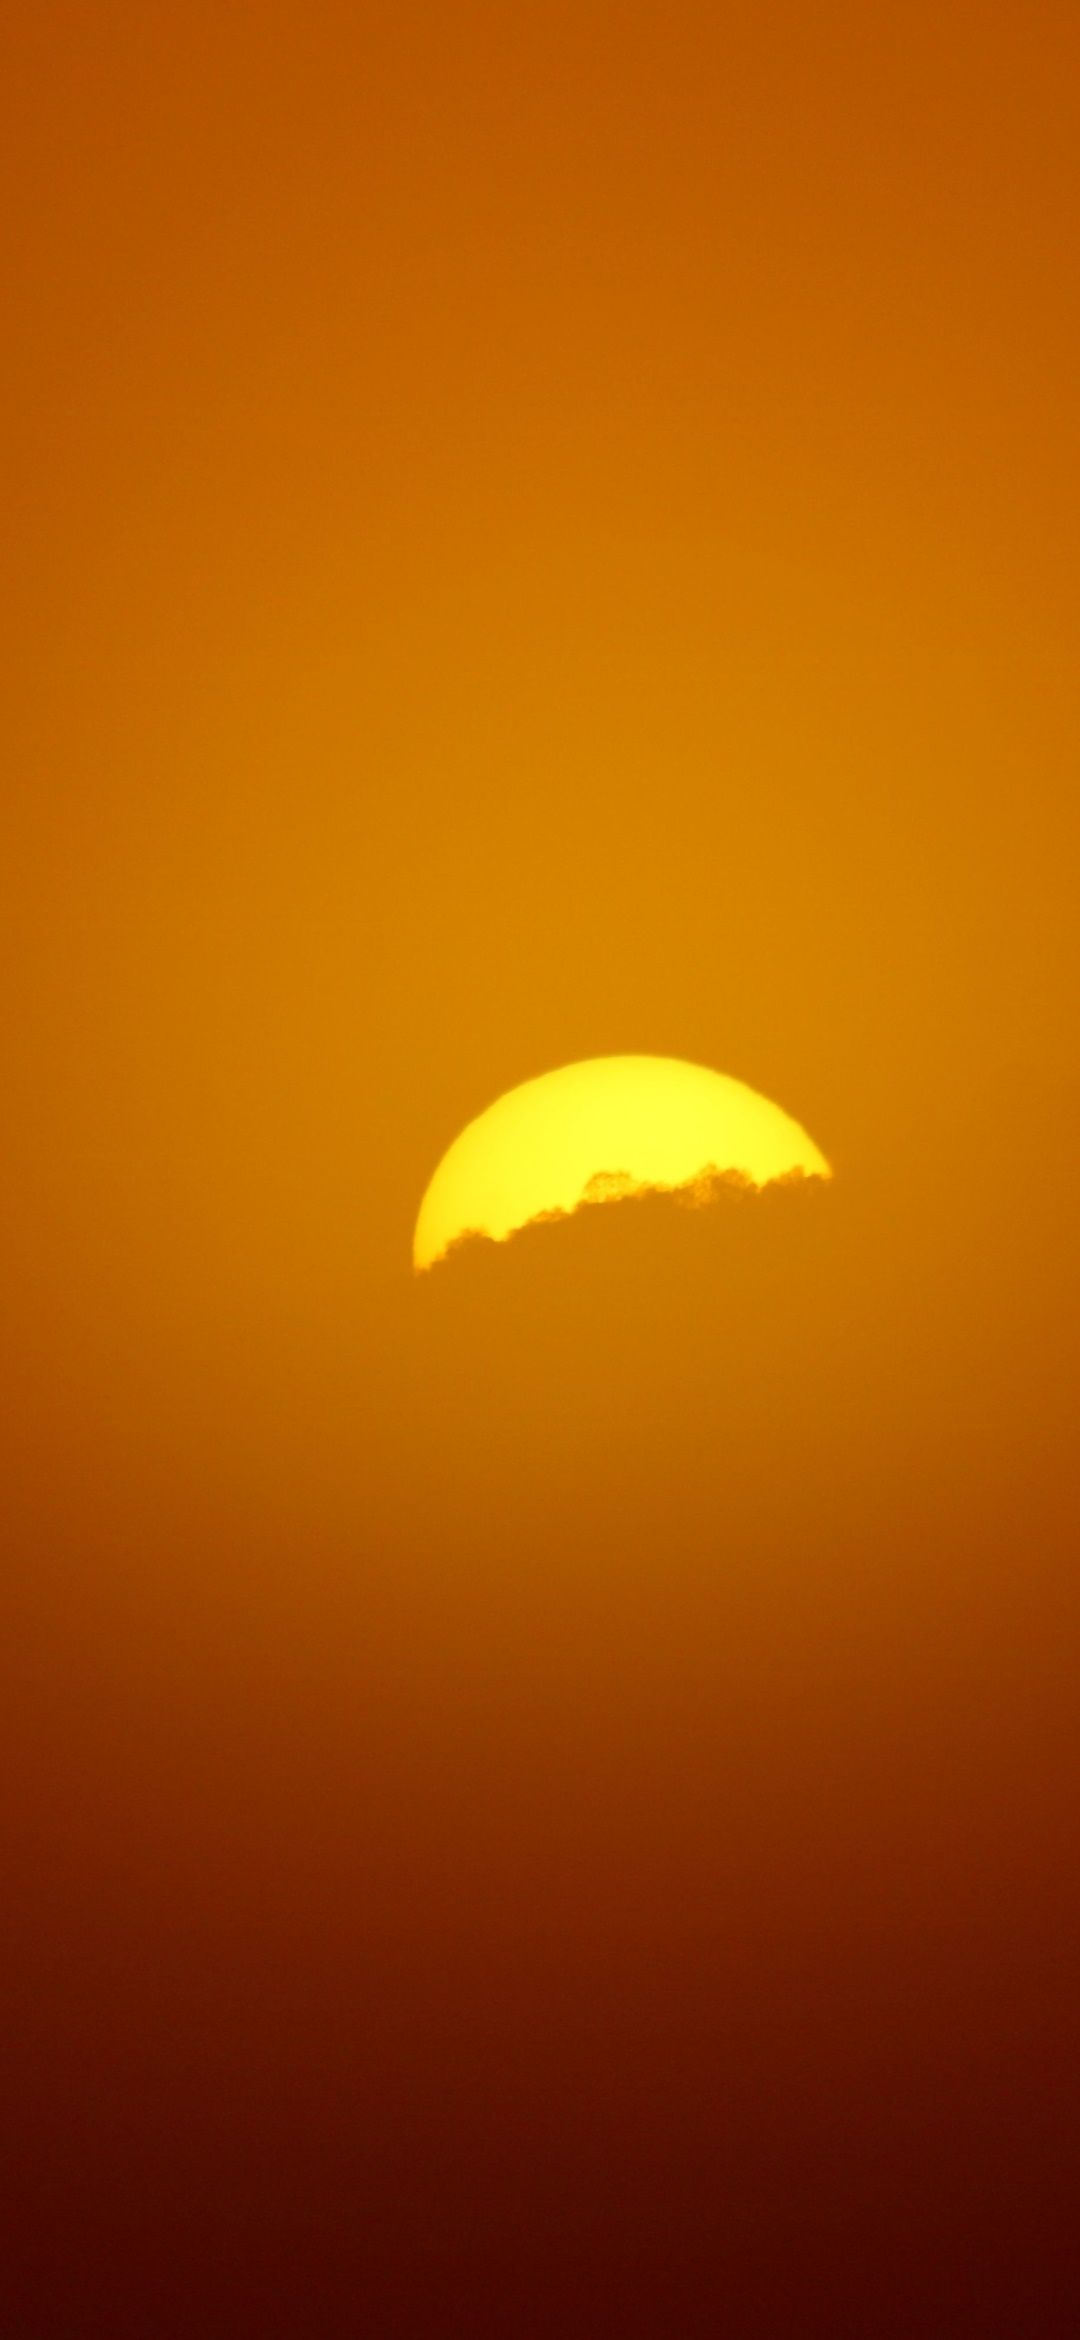 A sunset is seen in the sky - Sun